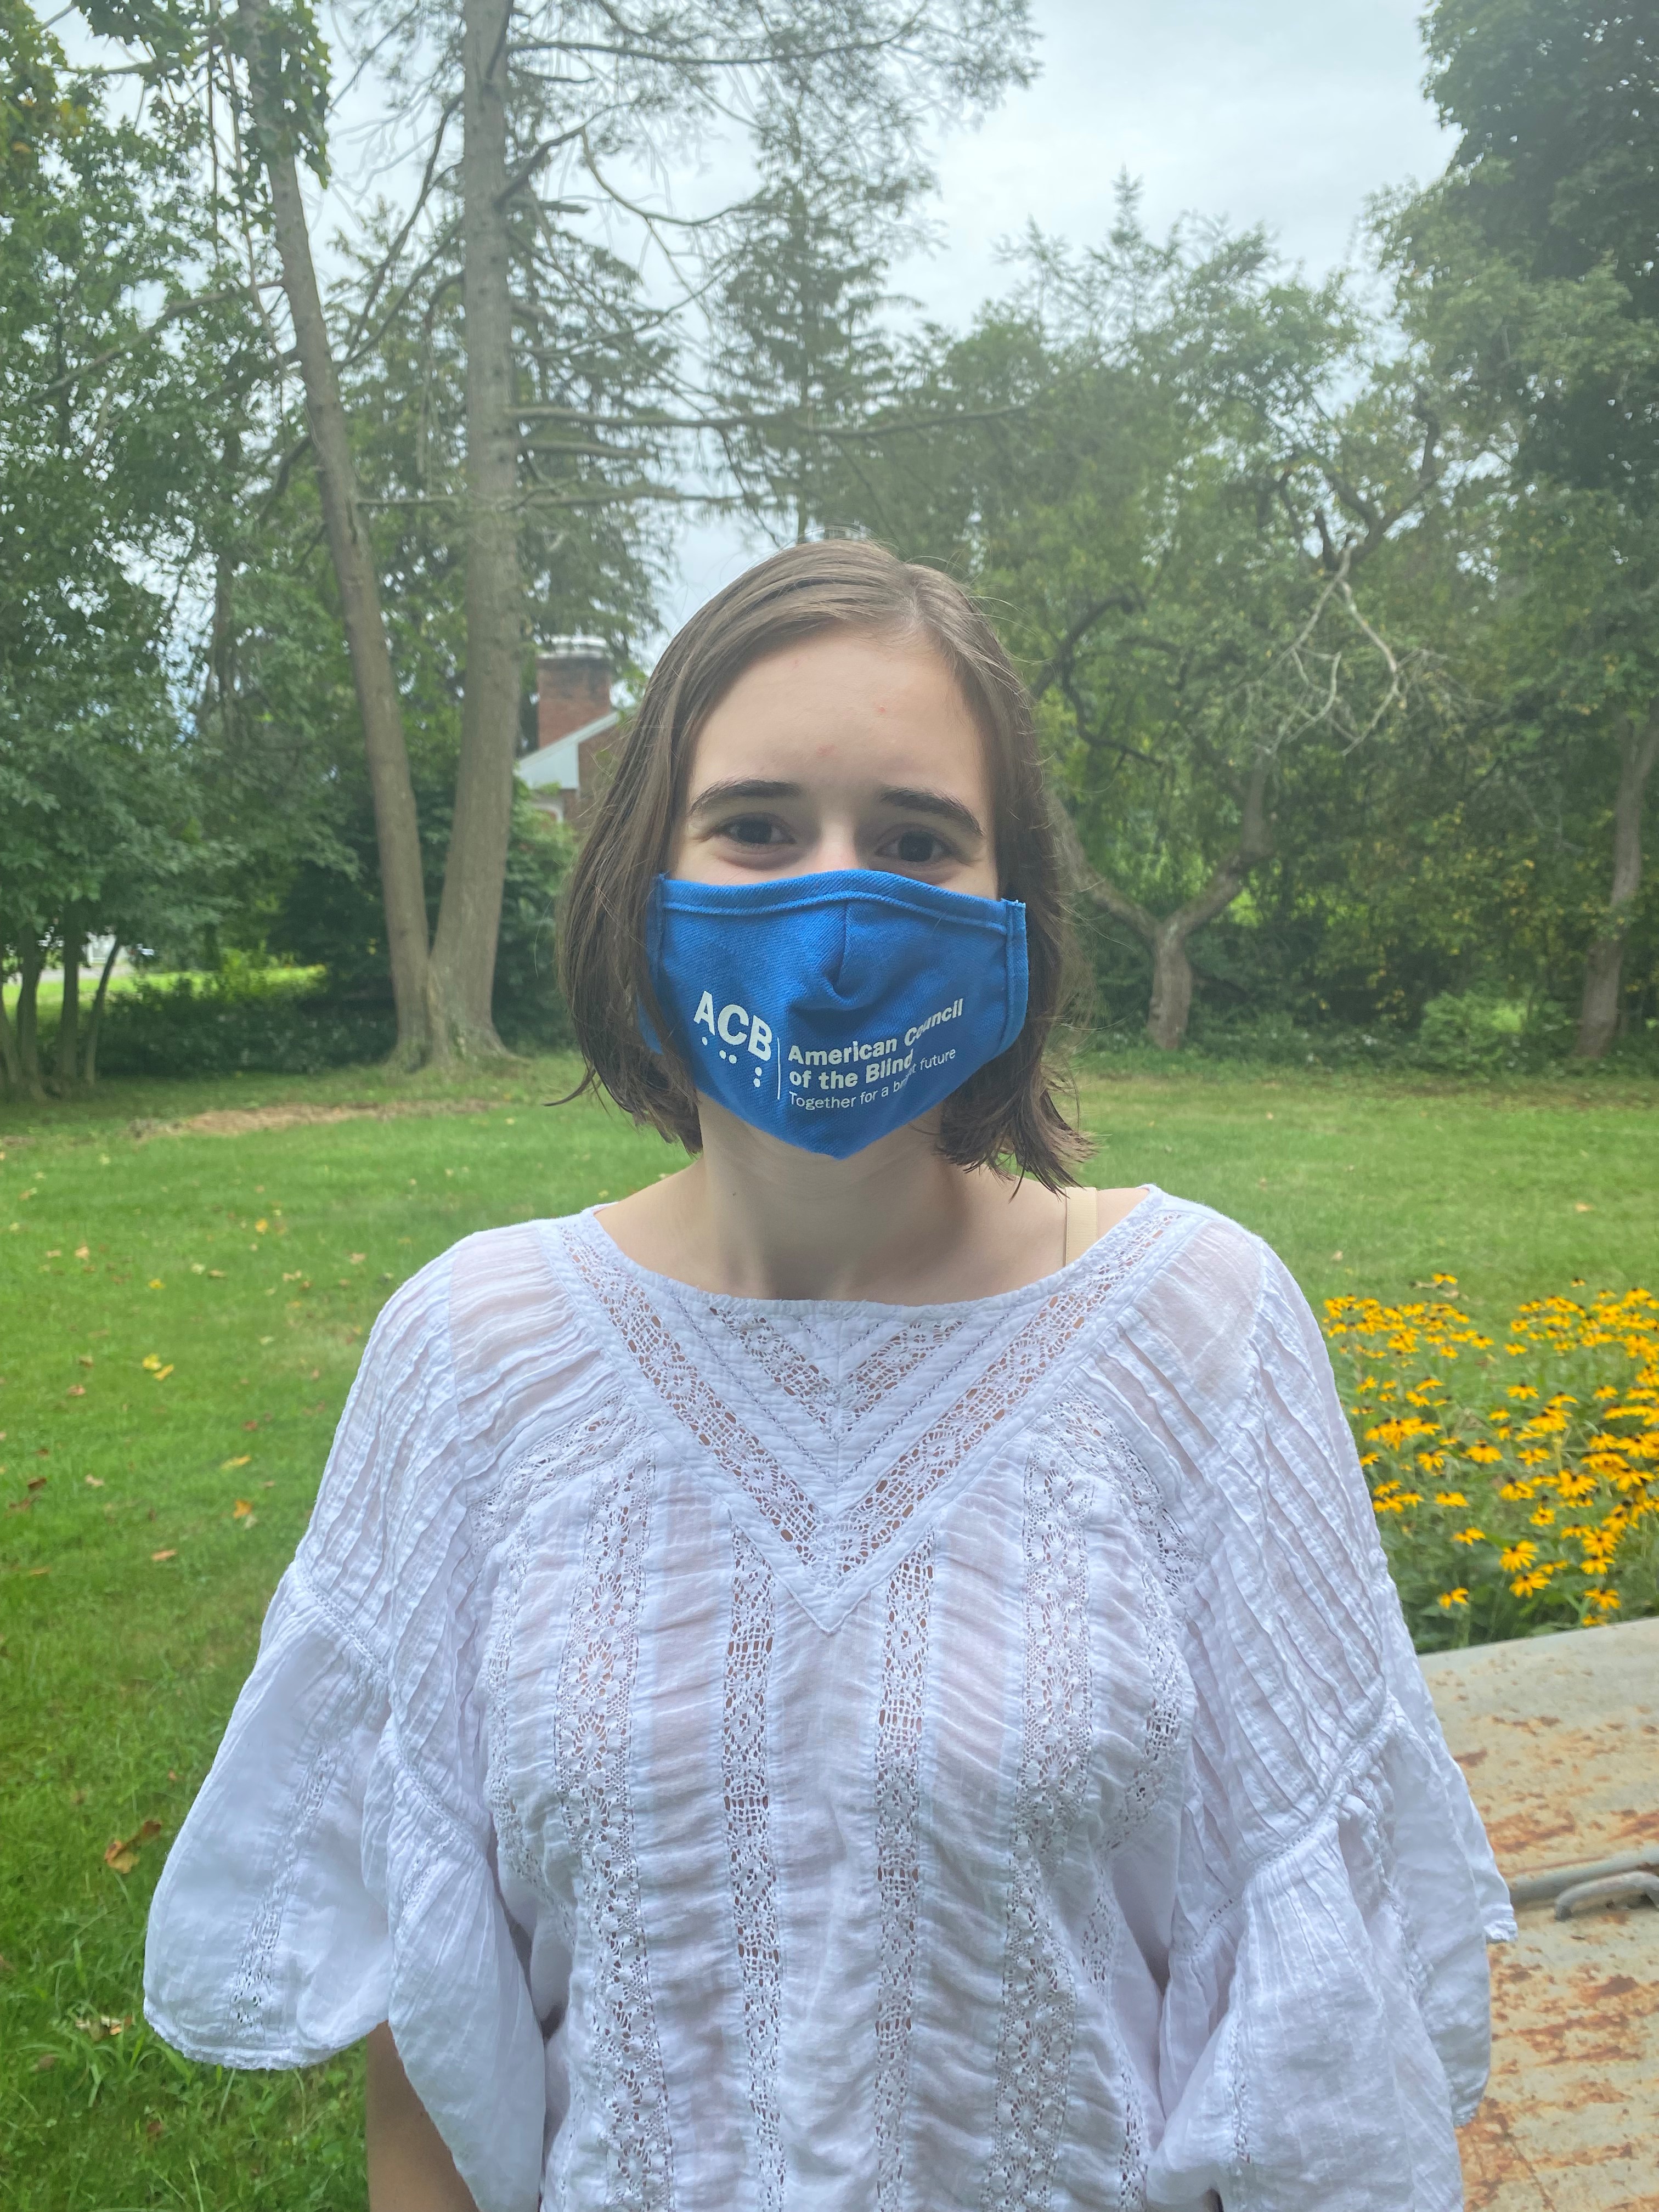 The young female author wearing a blue mask that reads "American Council of the Blind" in white text and Braille characters